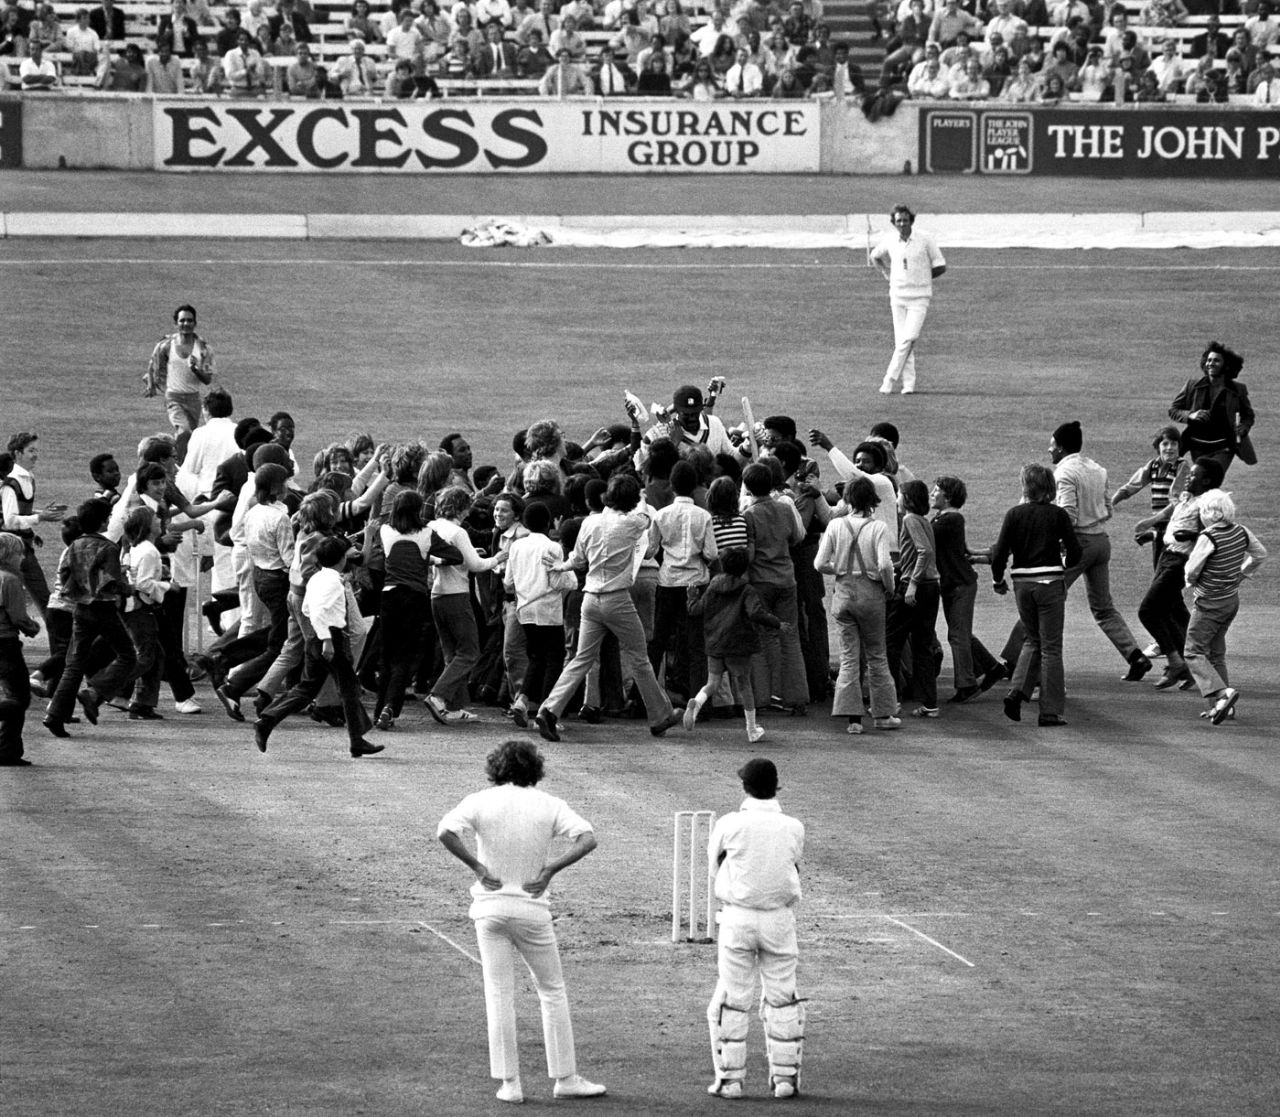 Spectators swarm Clive Lloyd to celebrate his century, England v West Indies,  1st Test, The Oval, 1st day, June 26, 1973